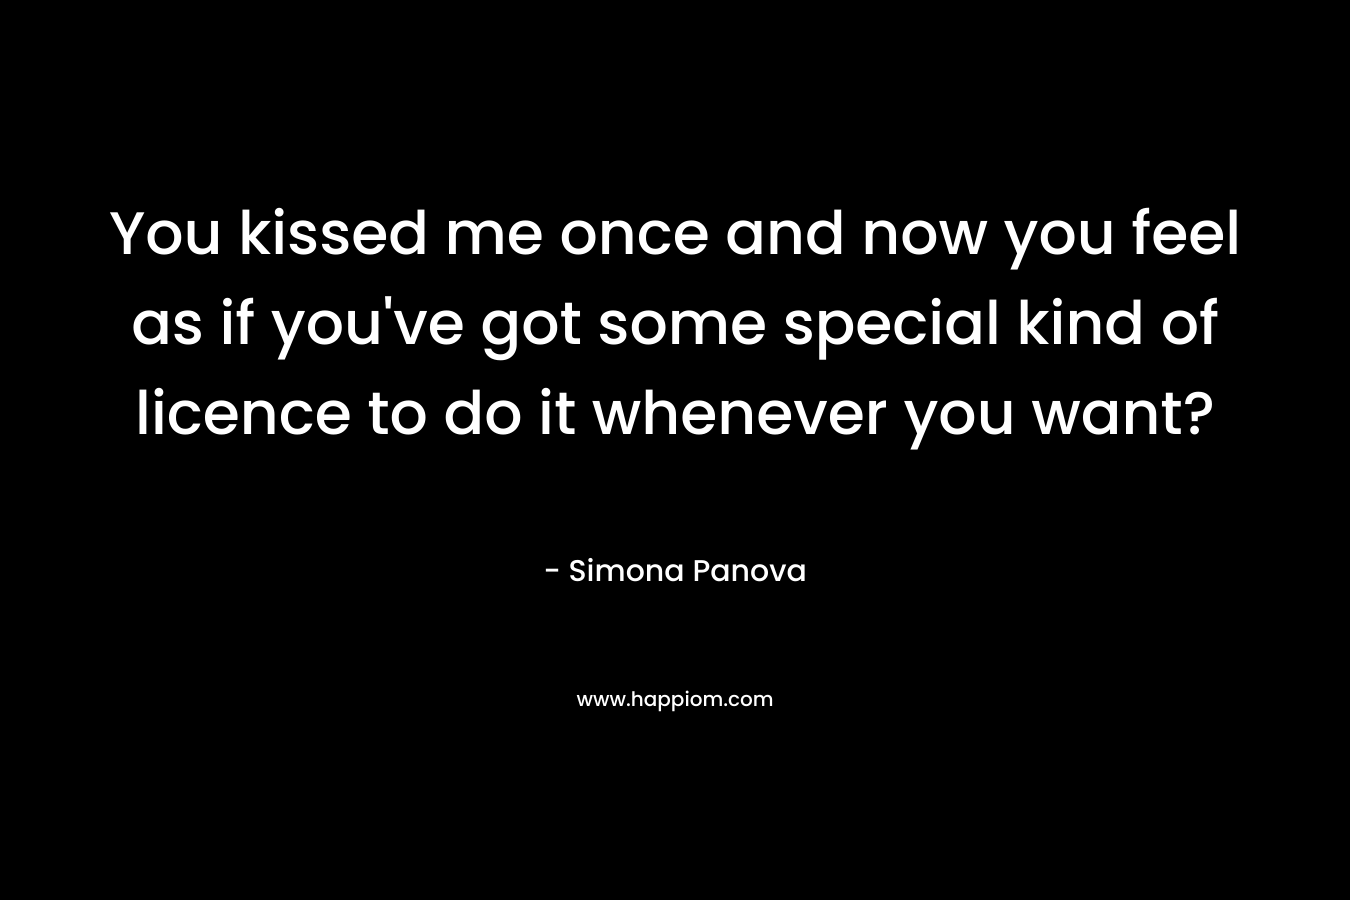 You kissed me once and now you feel as if you’ve got some special kind of licence to do it whenever you want? – Simona Panova